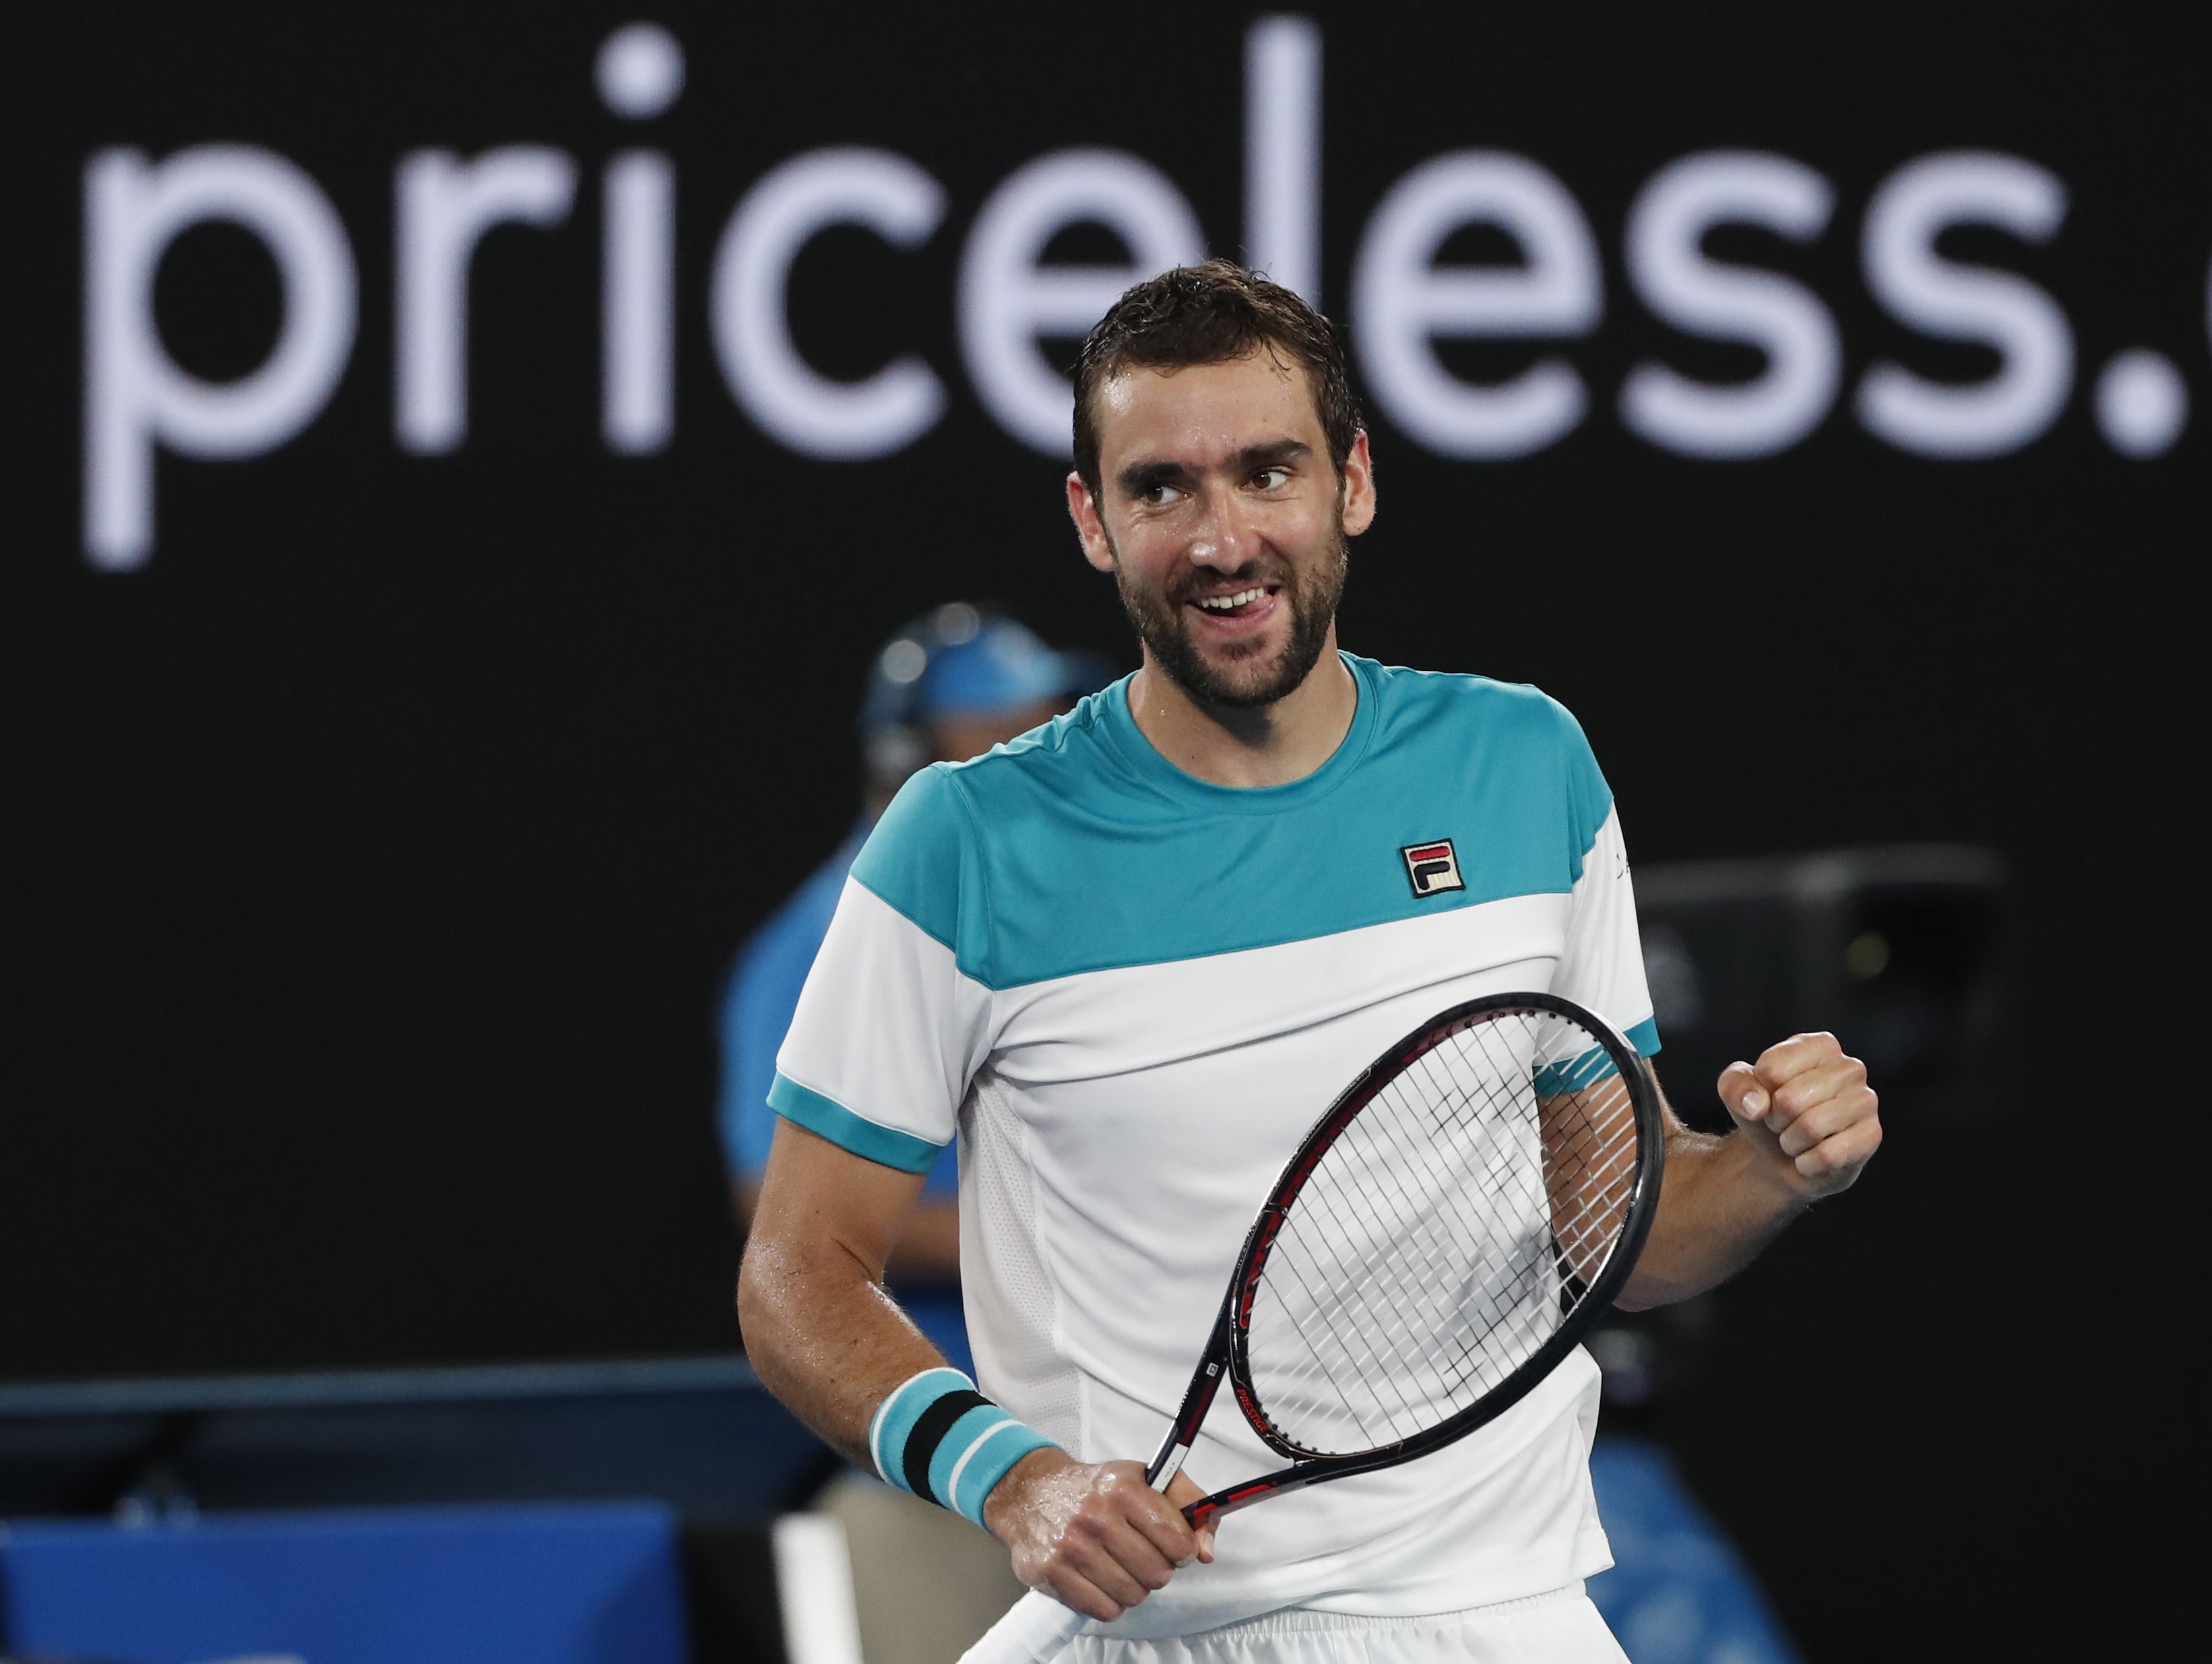 Tennis: Cilic aiming to turn up heat on Federer